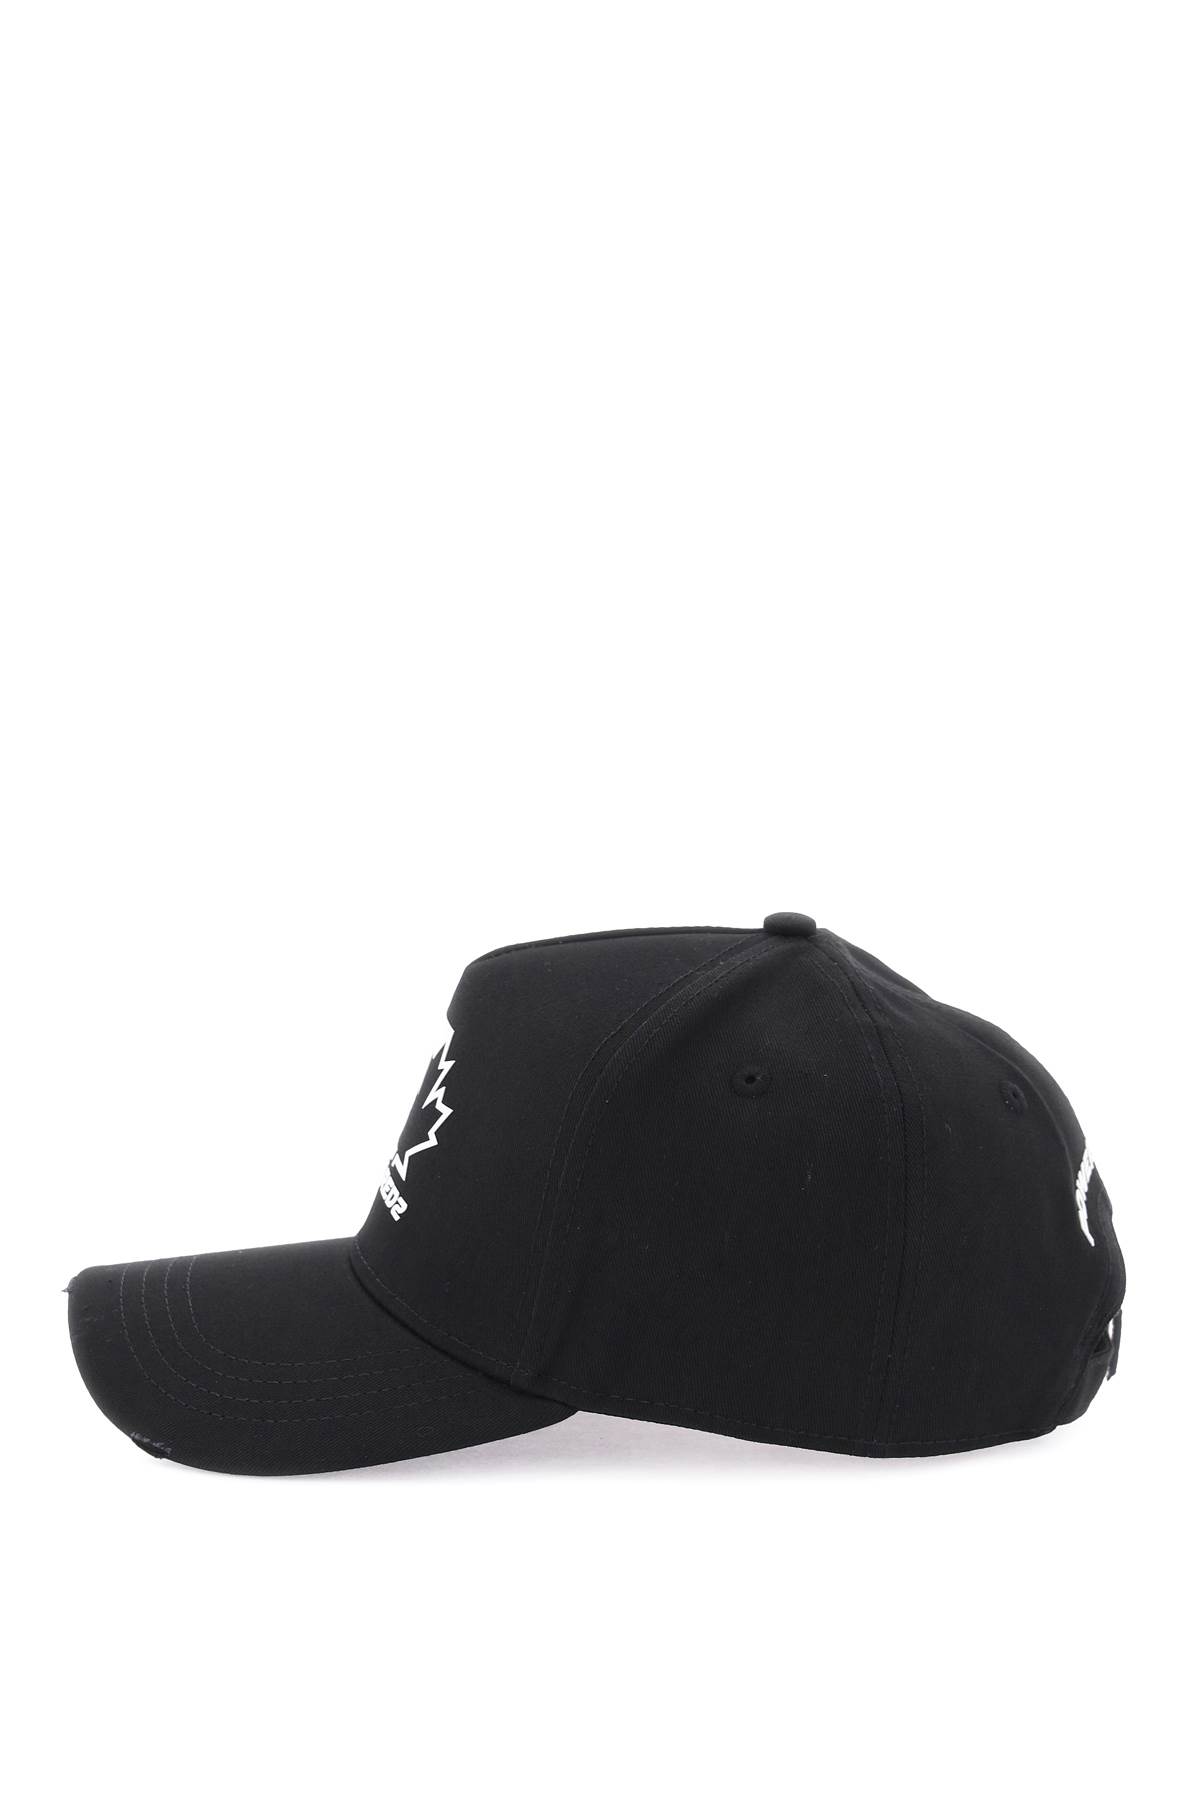 Shop Dsquared2 Baseball Cap With Logoed Patch In Black White (black)